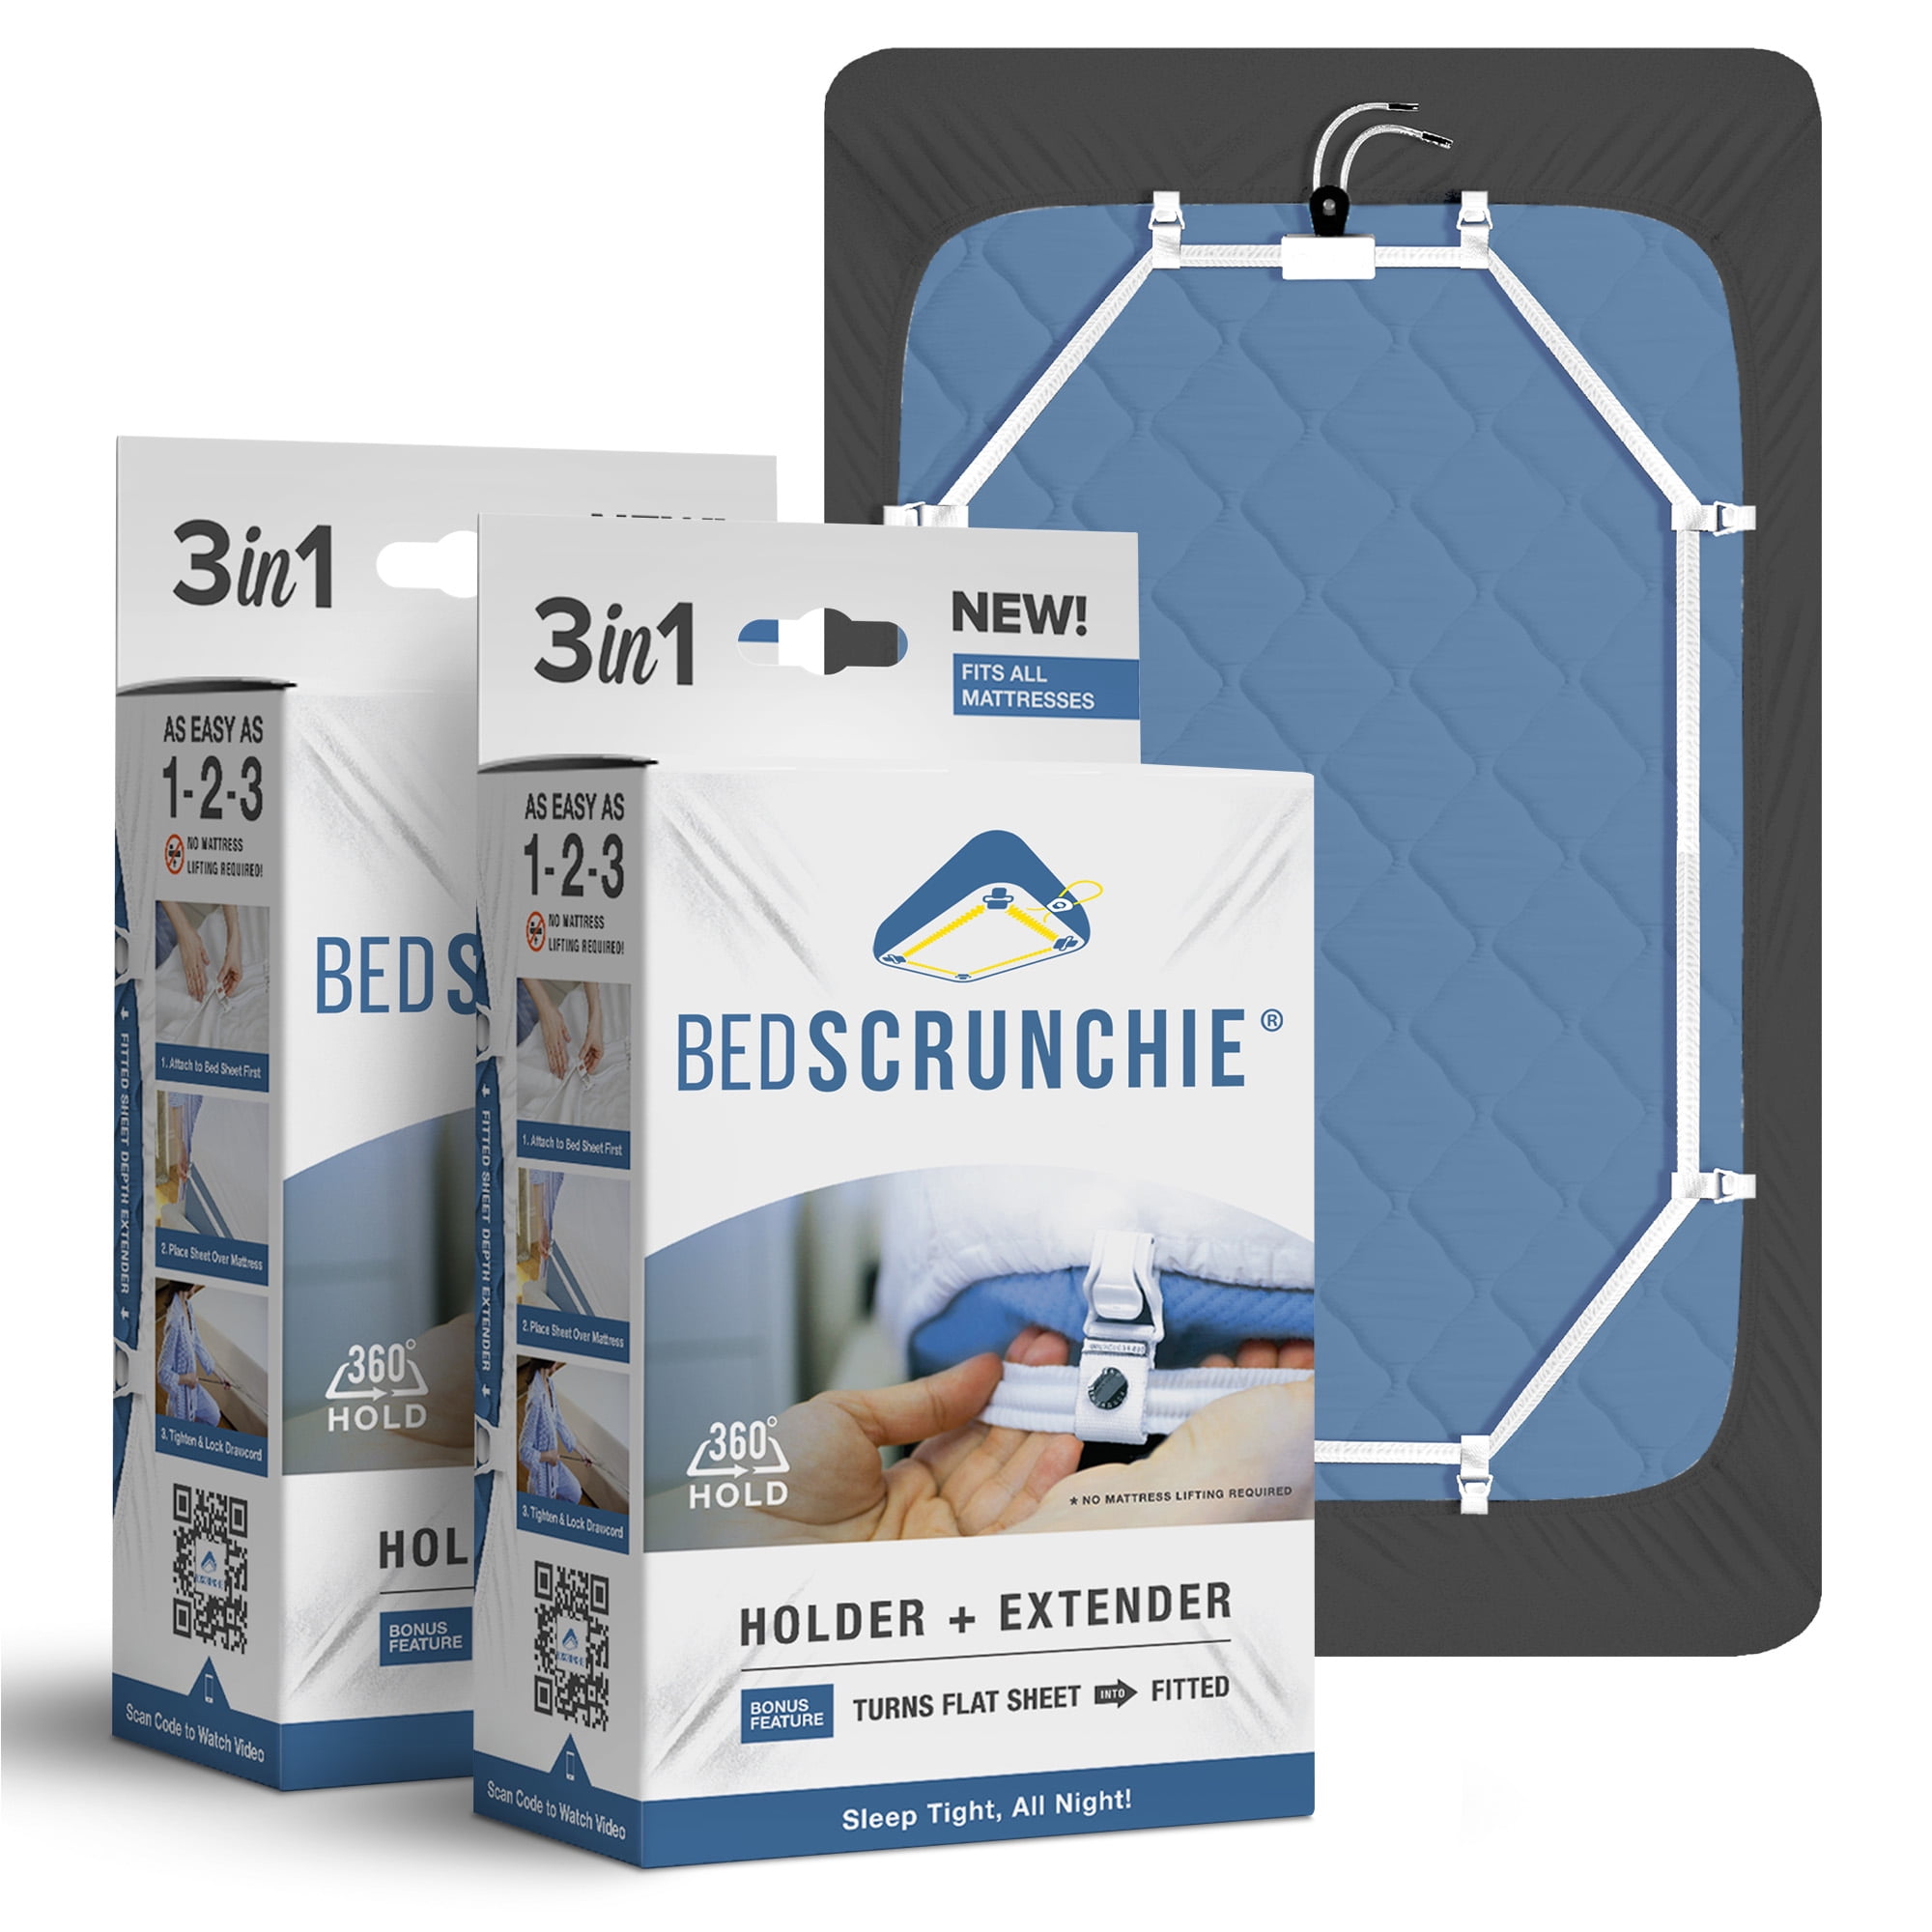 BED SCRUCHIE REVIEW - Decorate with Tip and More